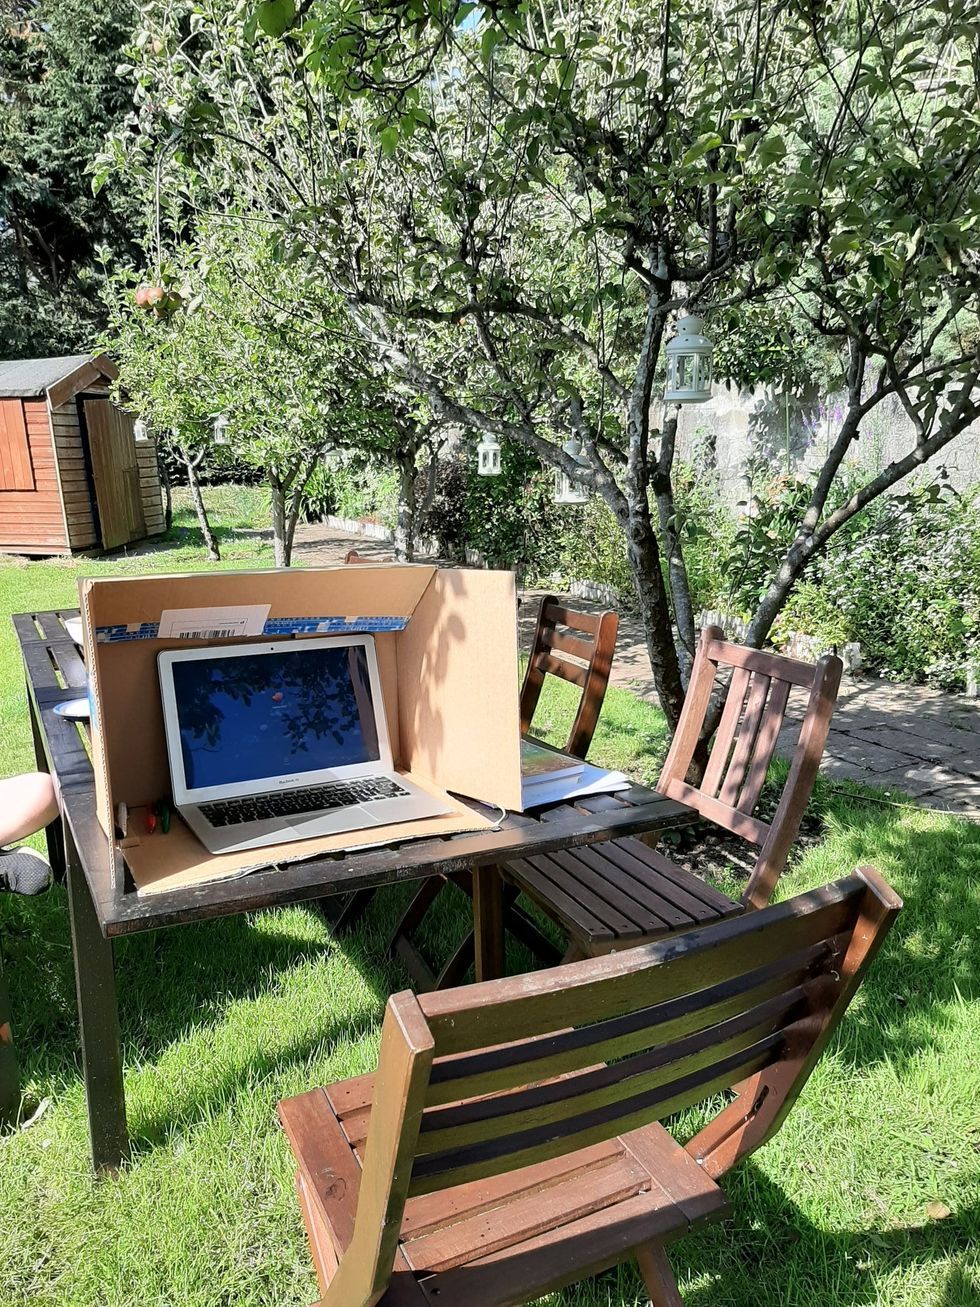 cardboard box with laptop inside outdoors